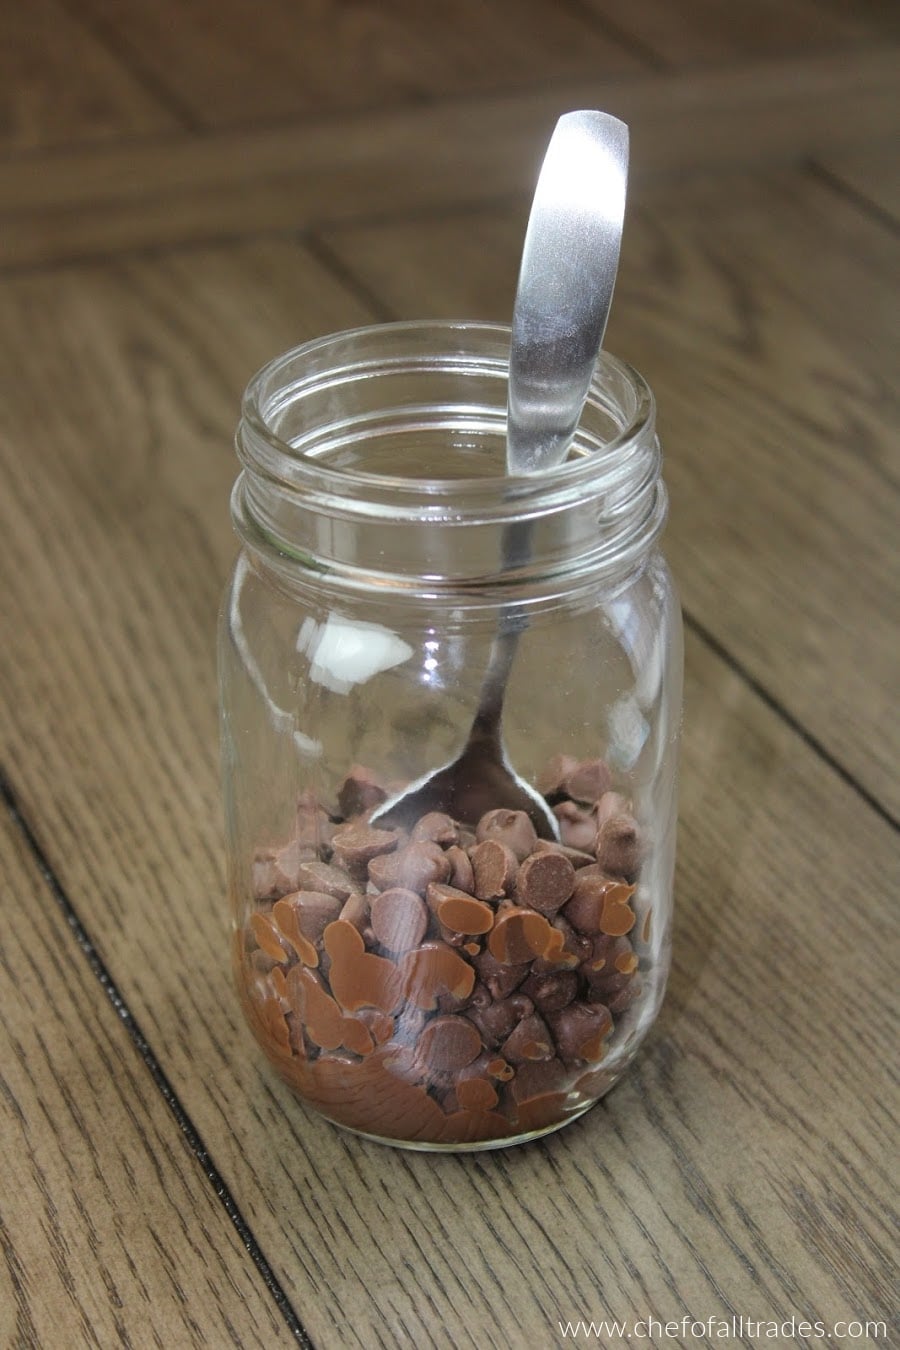 melting chocolate in a glass jar